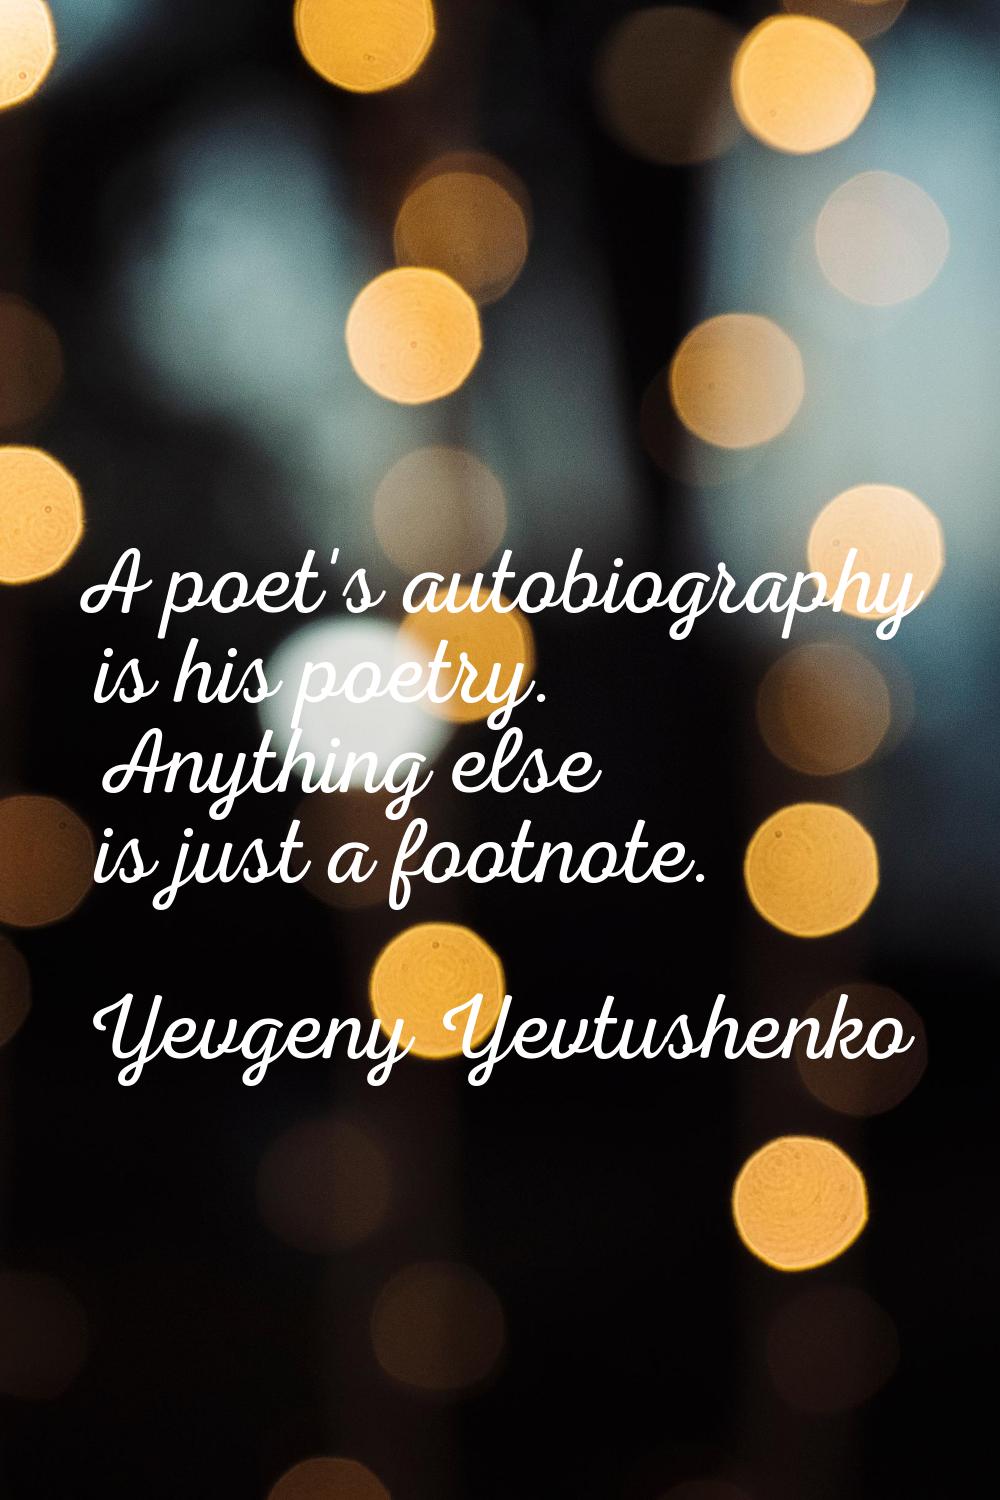 A poet's autobiography is his poetry. Anything else is just a footnote.